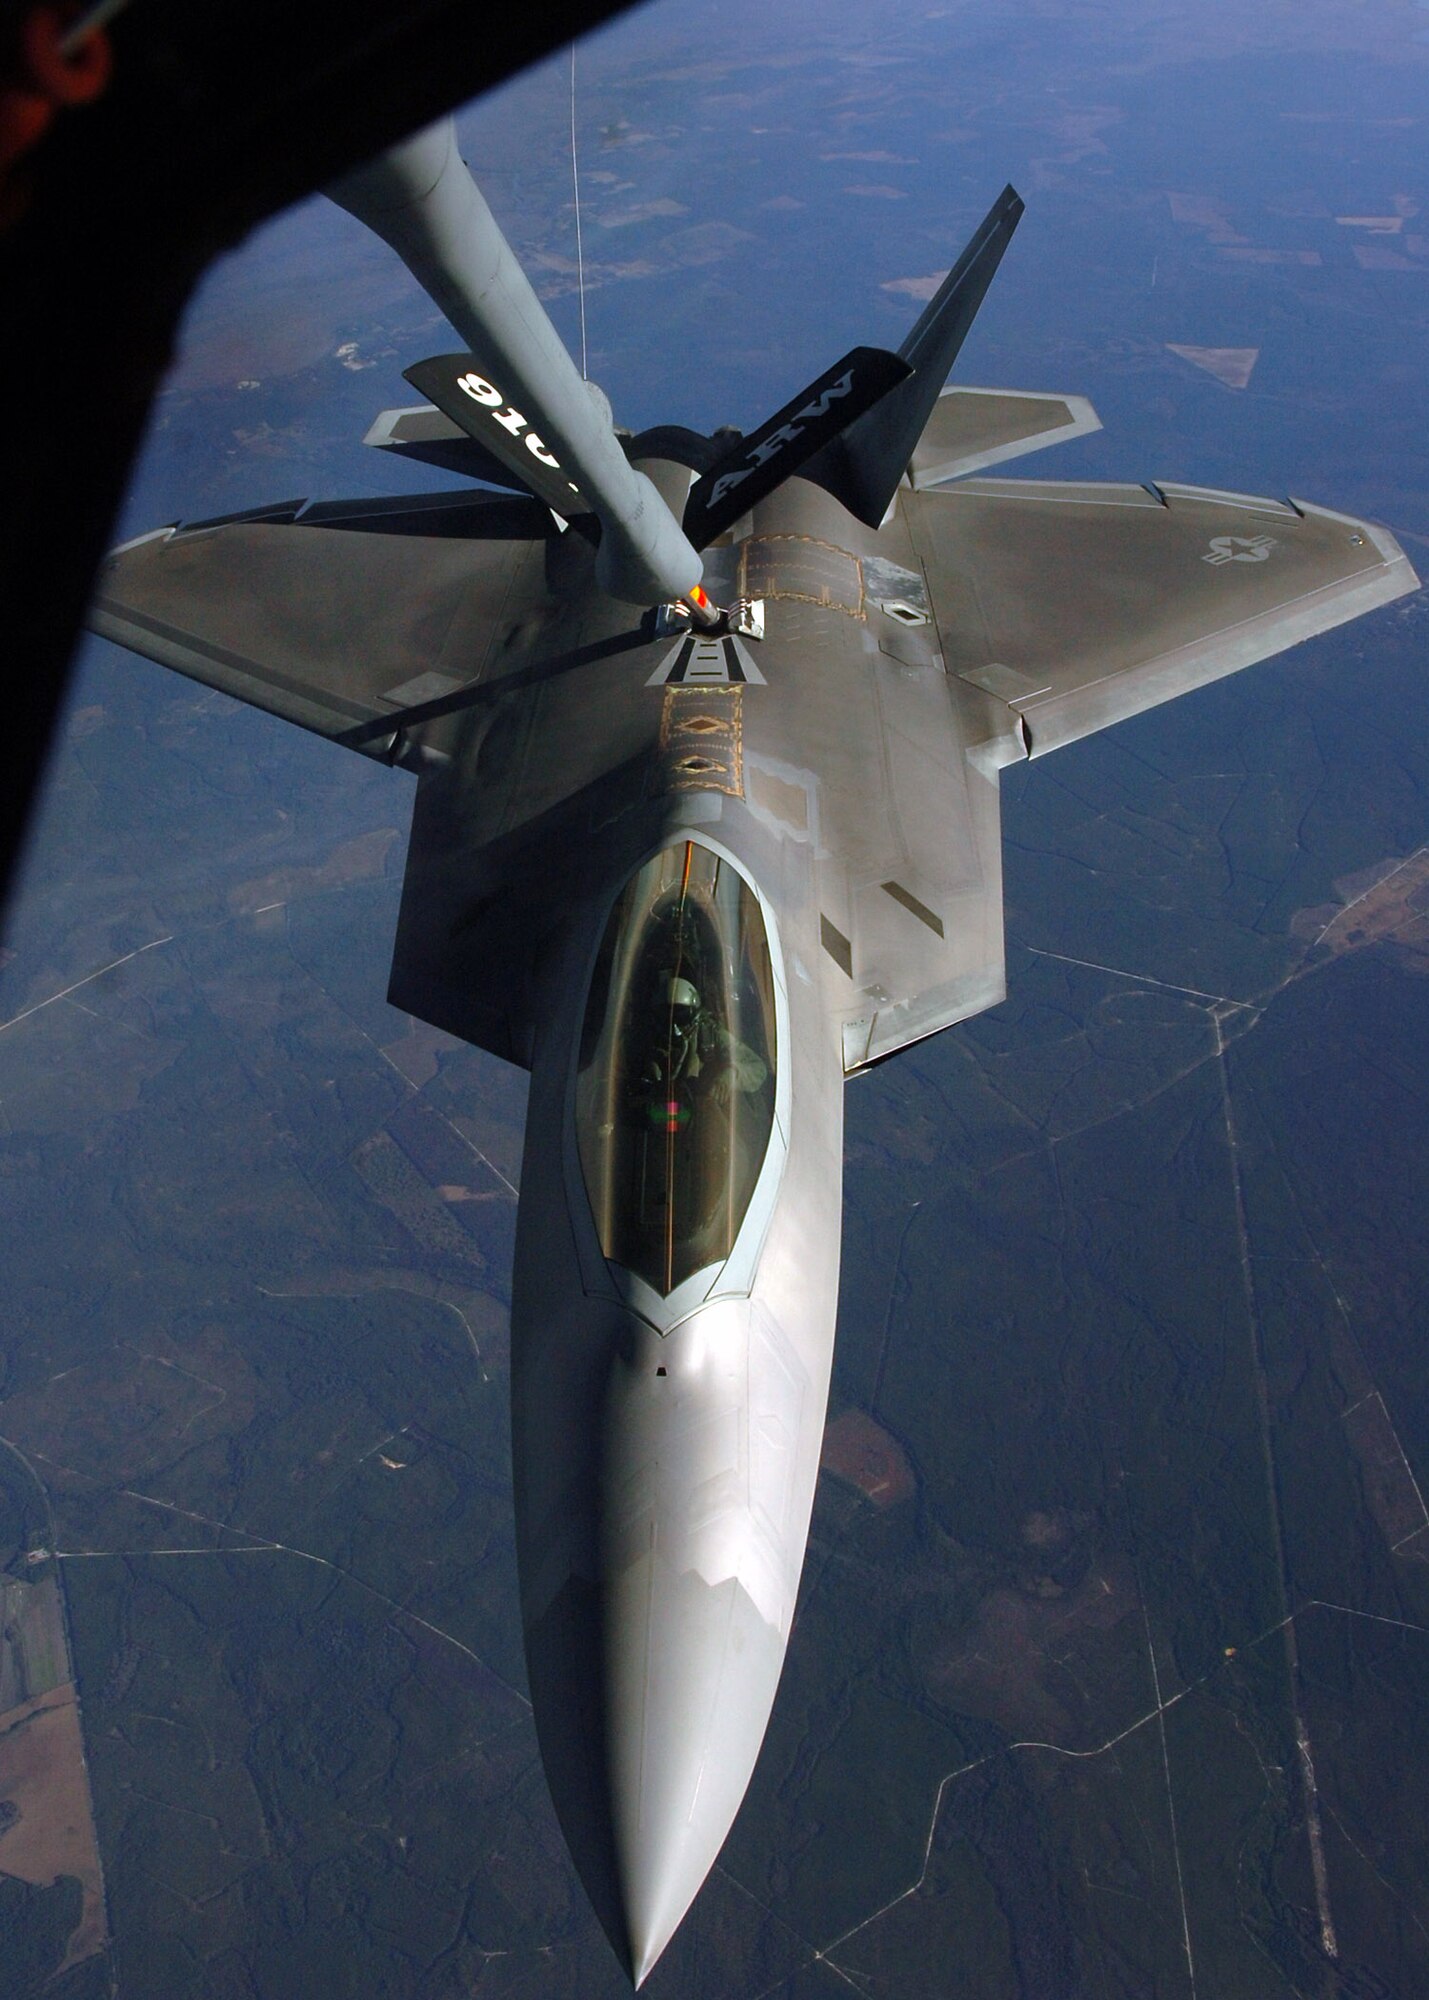 An F-22 Raptor receives fuel from a KC-135 Stratotanker during an air-to-air refueling training mission Dec. 4 over Eglin Air Force Base, Fla. The F-22 is from the 43rd Fighter Squadron at Tyndall AFB, Fla. The KC-135 is from the 916th Air Refueling Wing, an Air Force Reserve wing located at Seymour Johnson AFB, N.C.  (U.S. Air Force photo/Staff Sgt. Bryan Franks)
